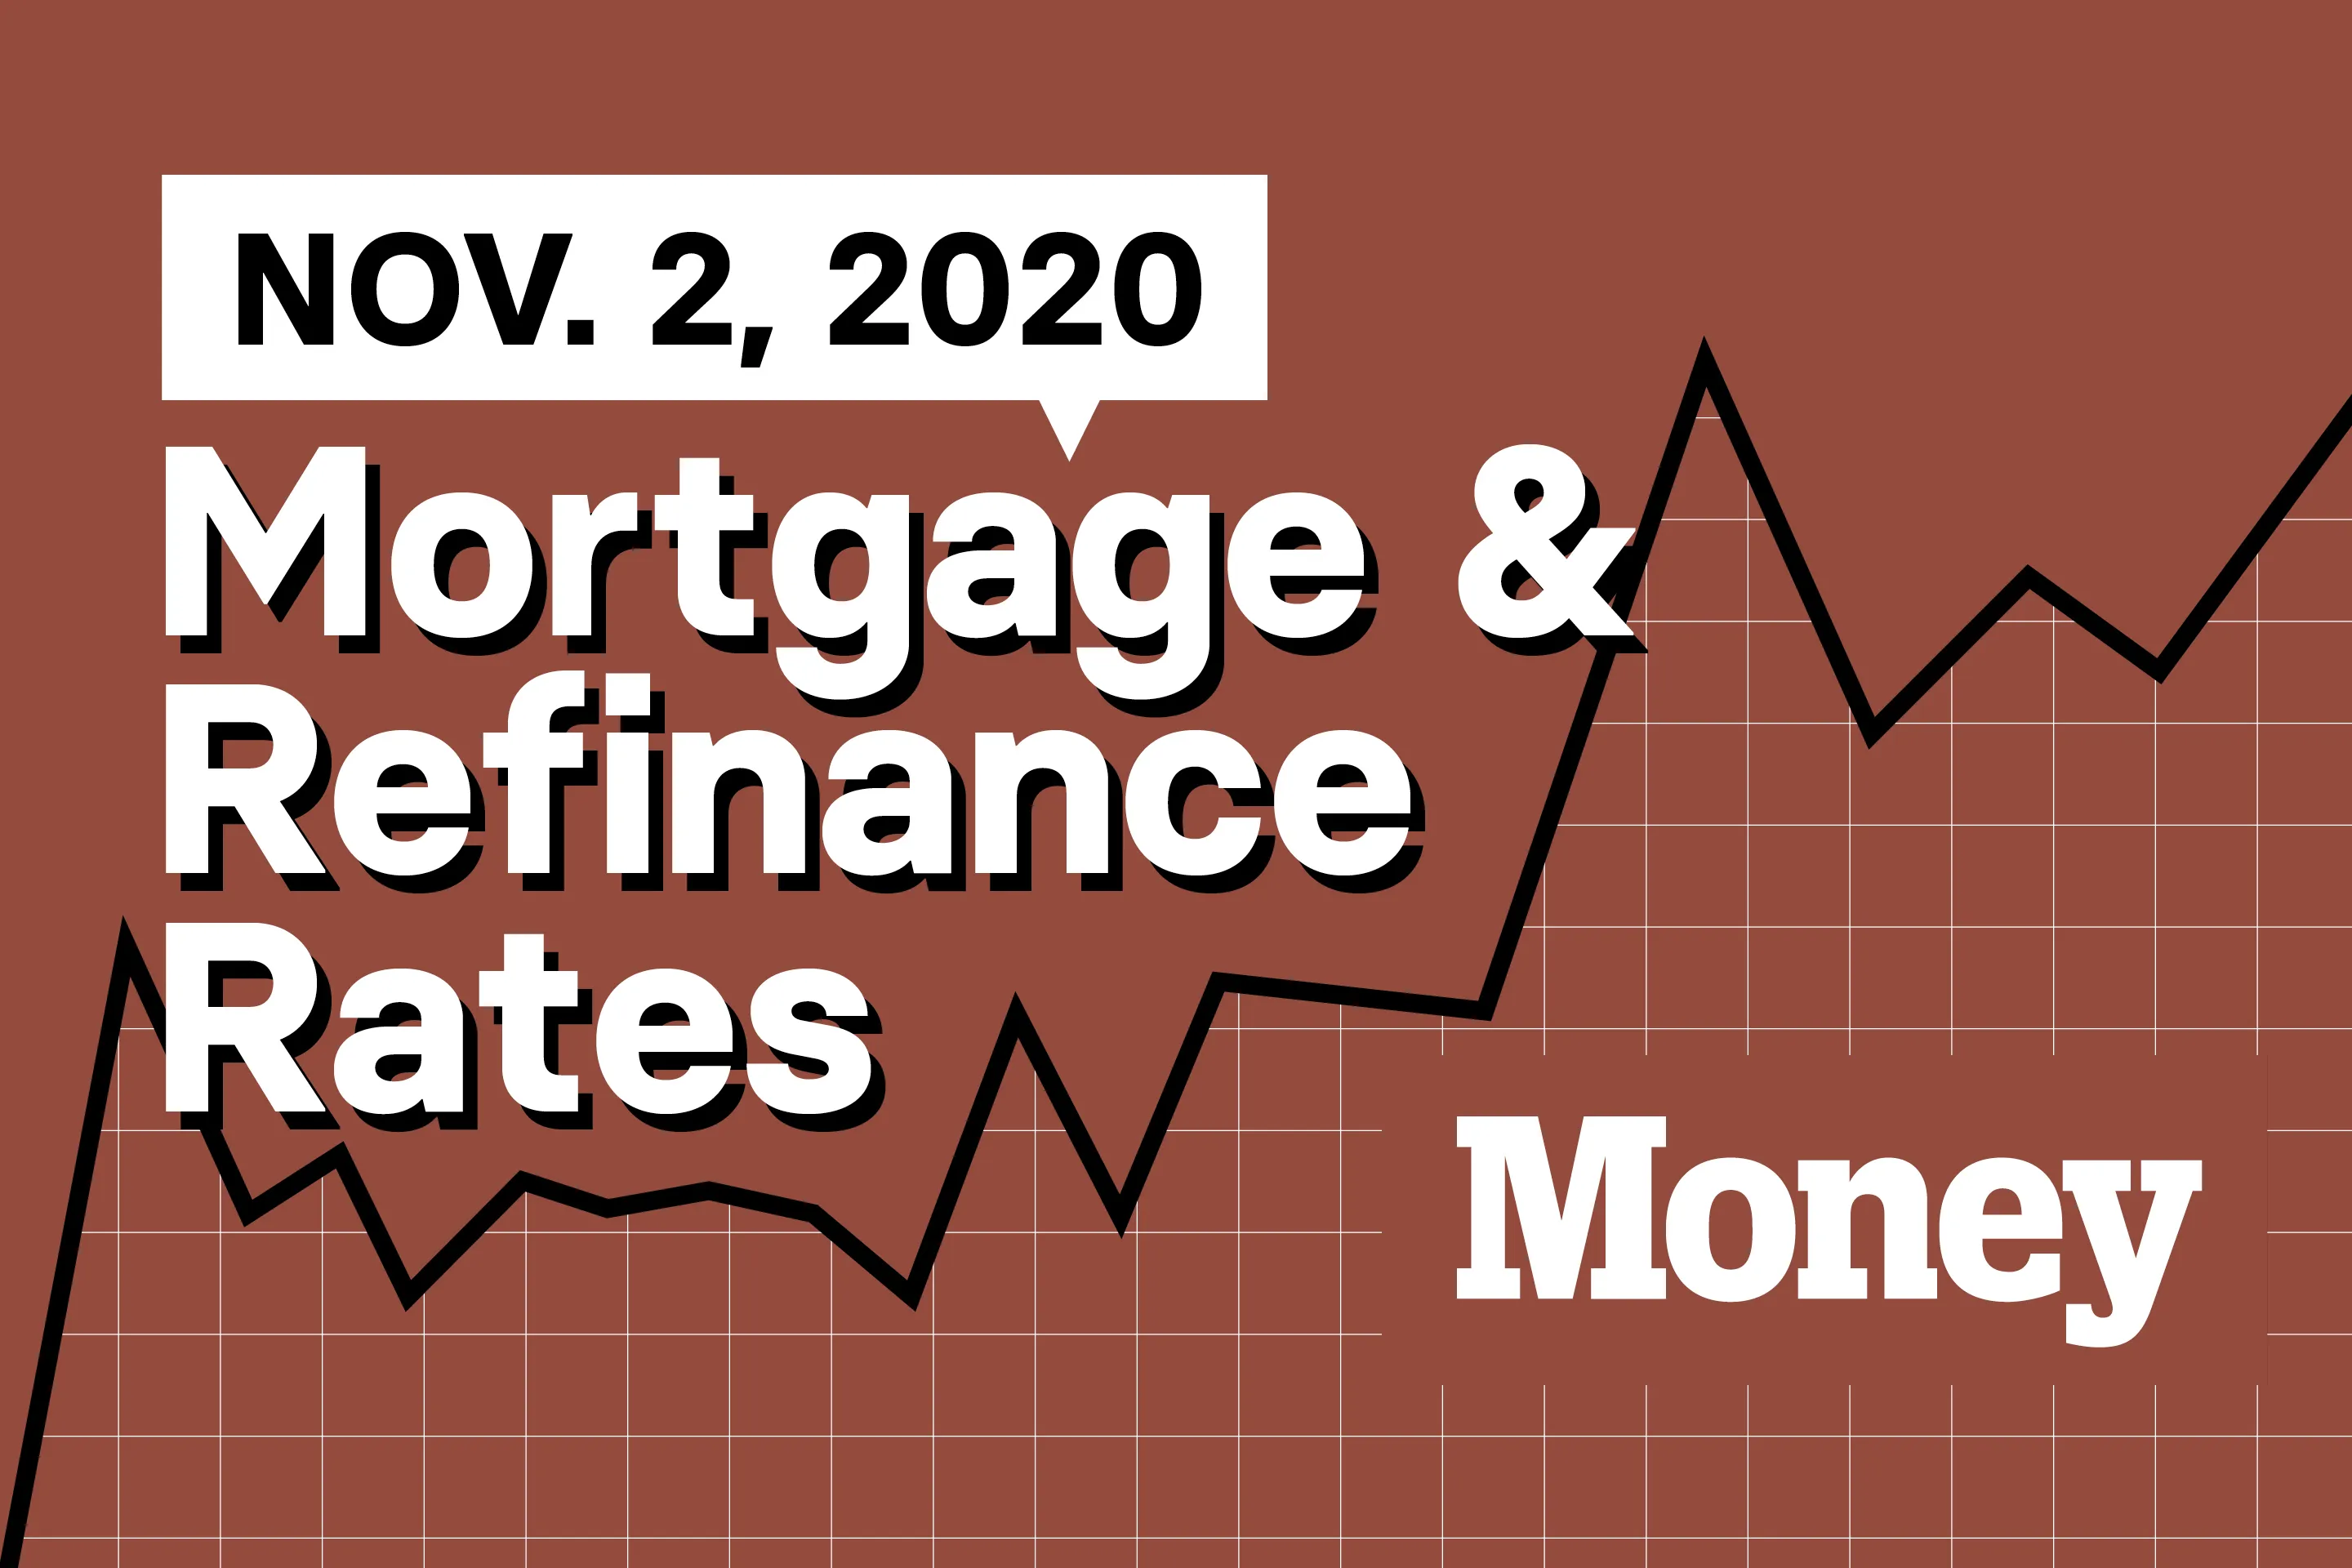 Here Are Today's Best Mortgage & Refinance Rates for November 2, 2020